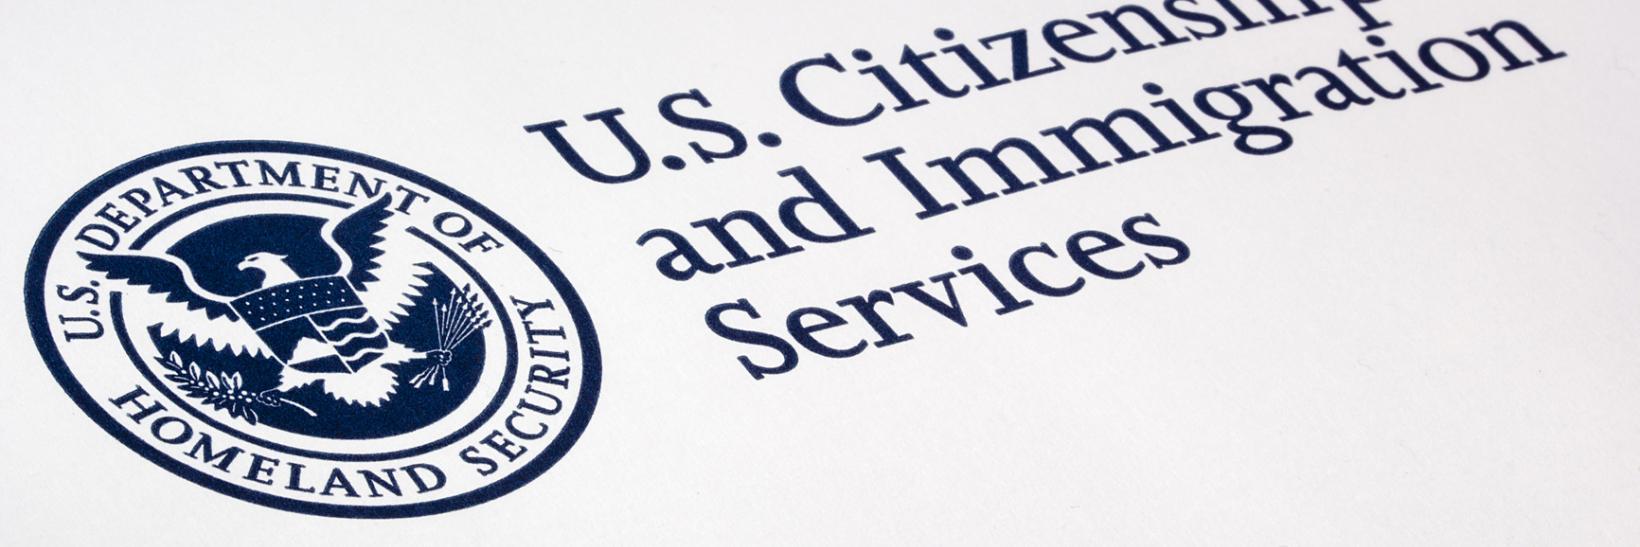 U.S. Department of Homeland Security logo, U.S. Citizenship and Immigration Services